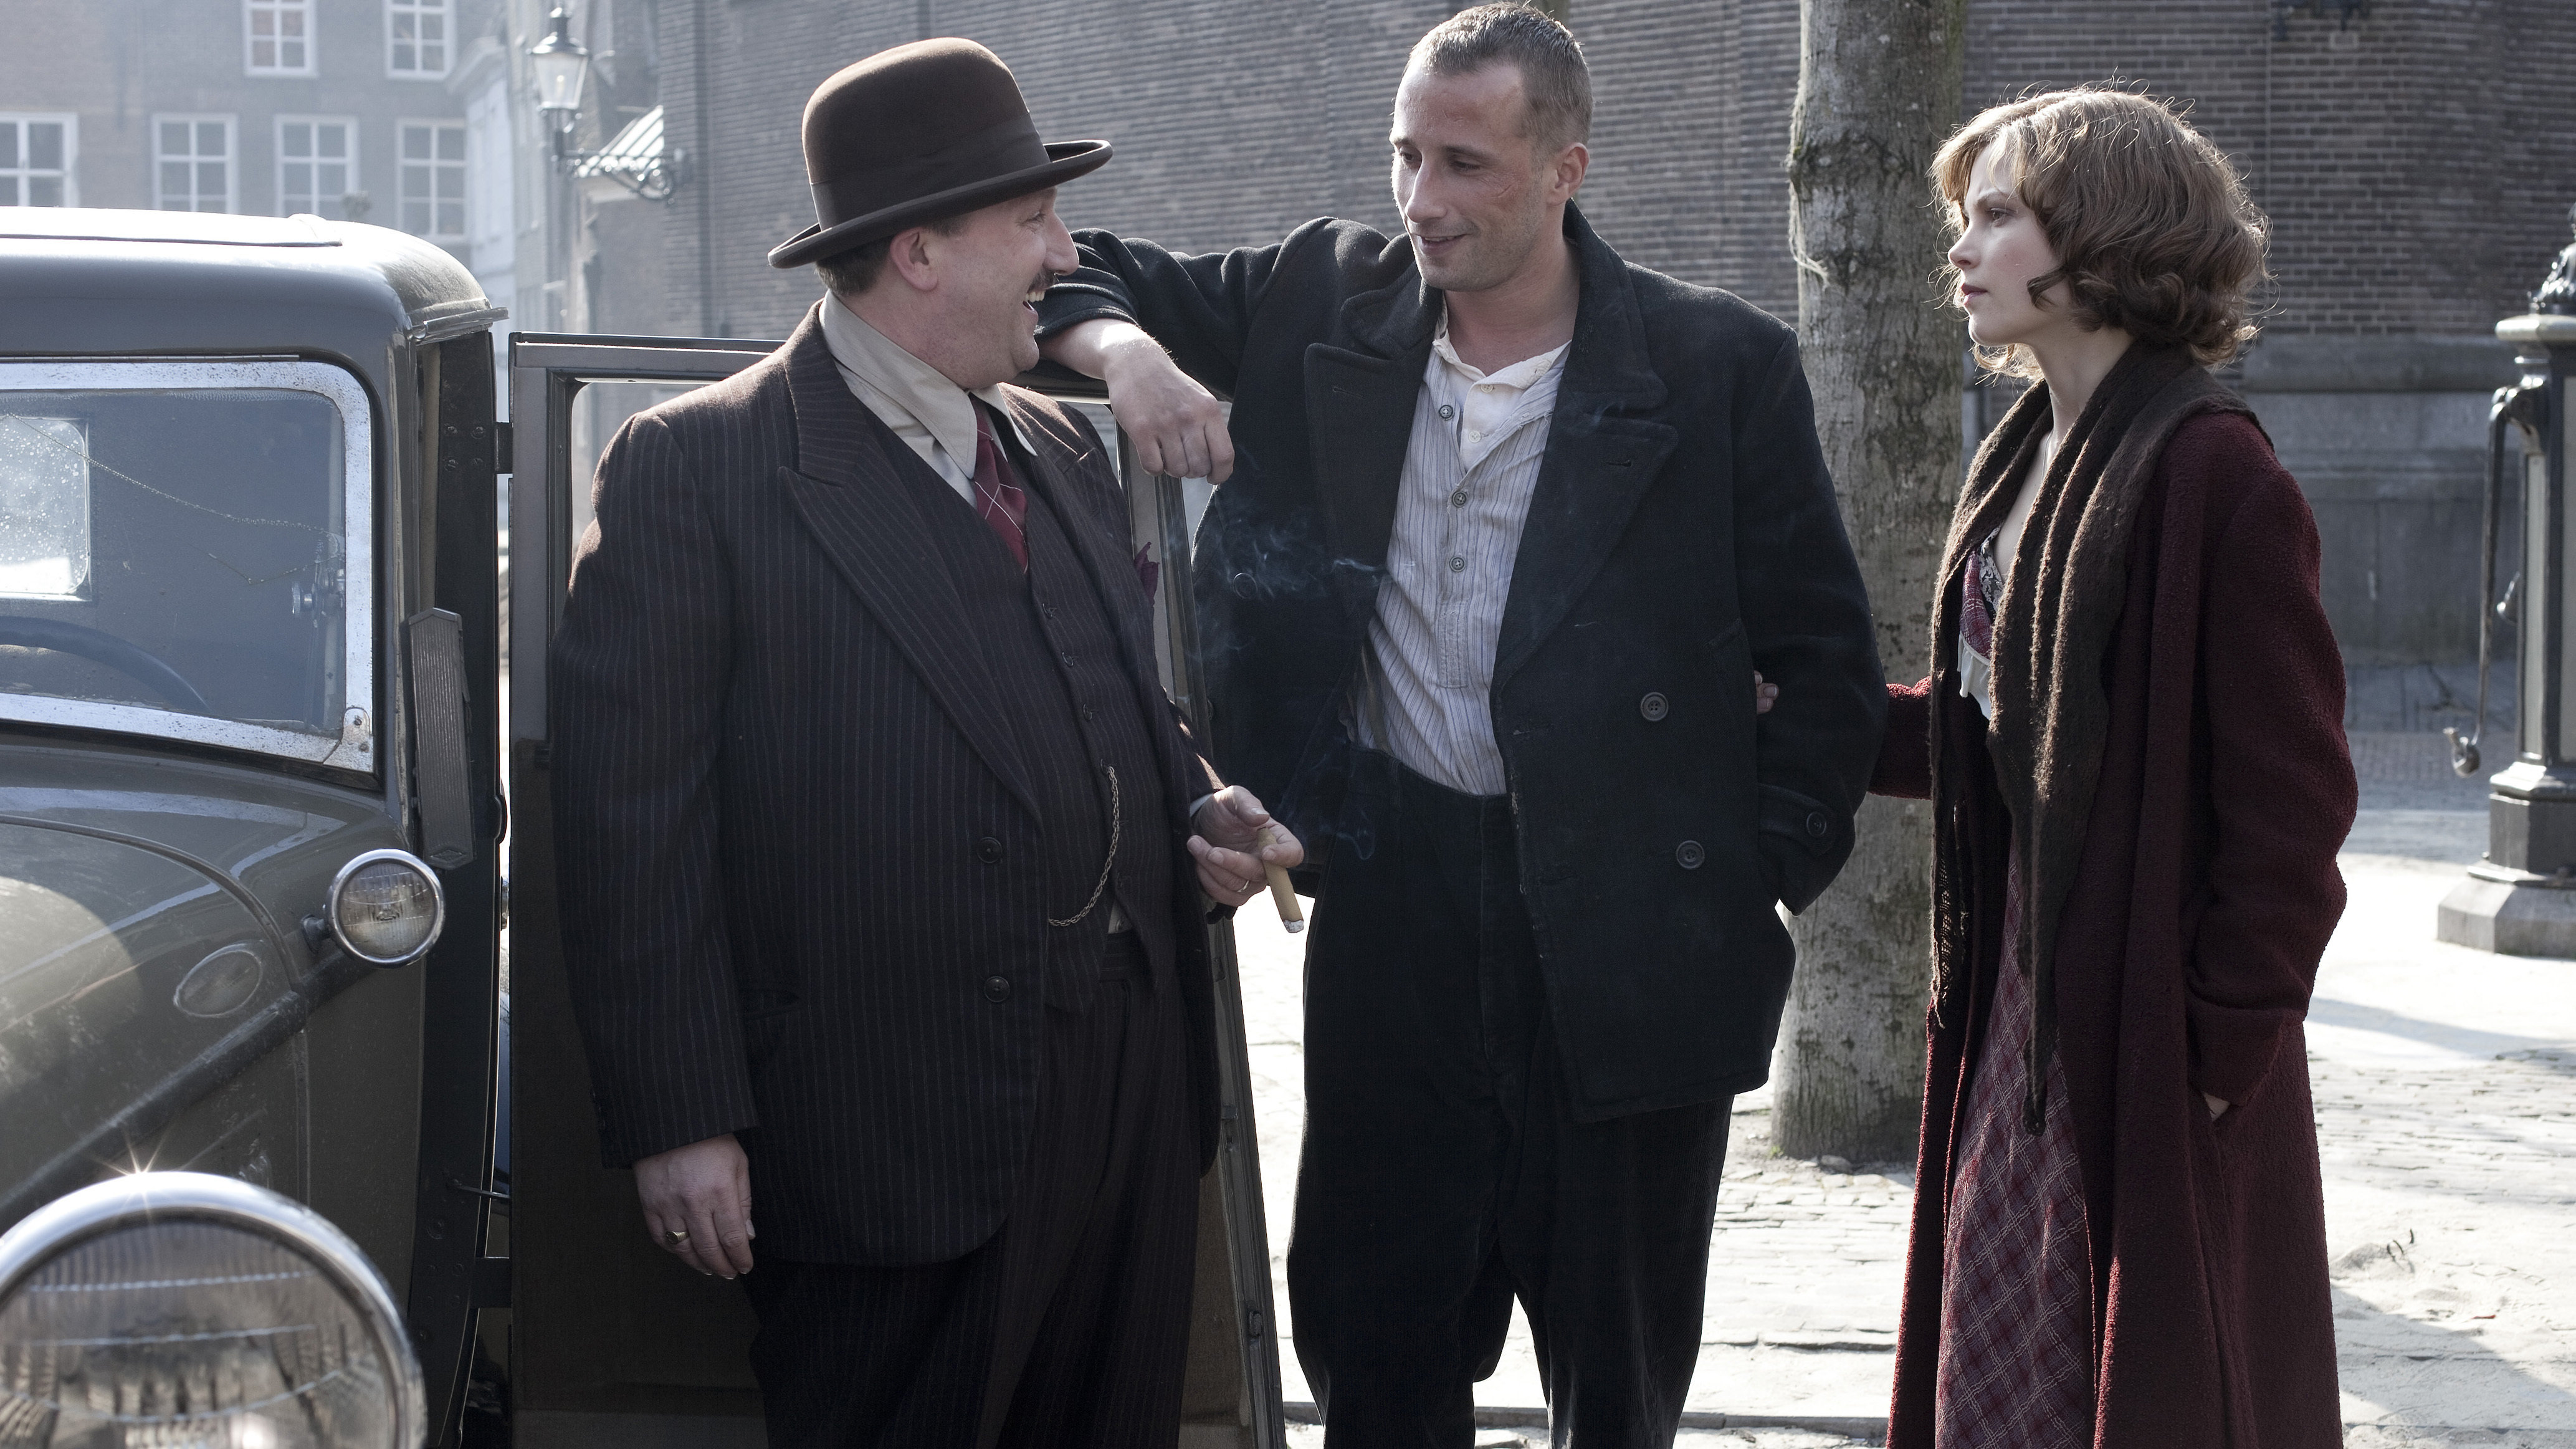 Photography Victor Arnolds Marcel Musters, Matthias Schoenarts and Sylvia Hoeks